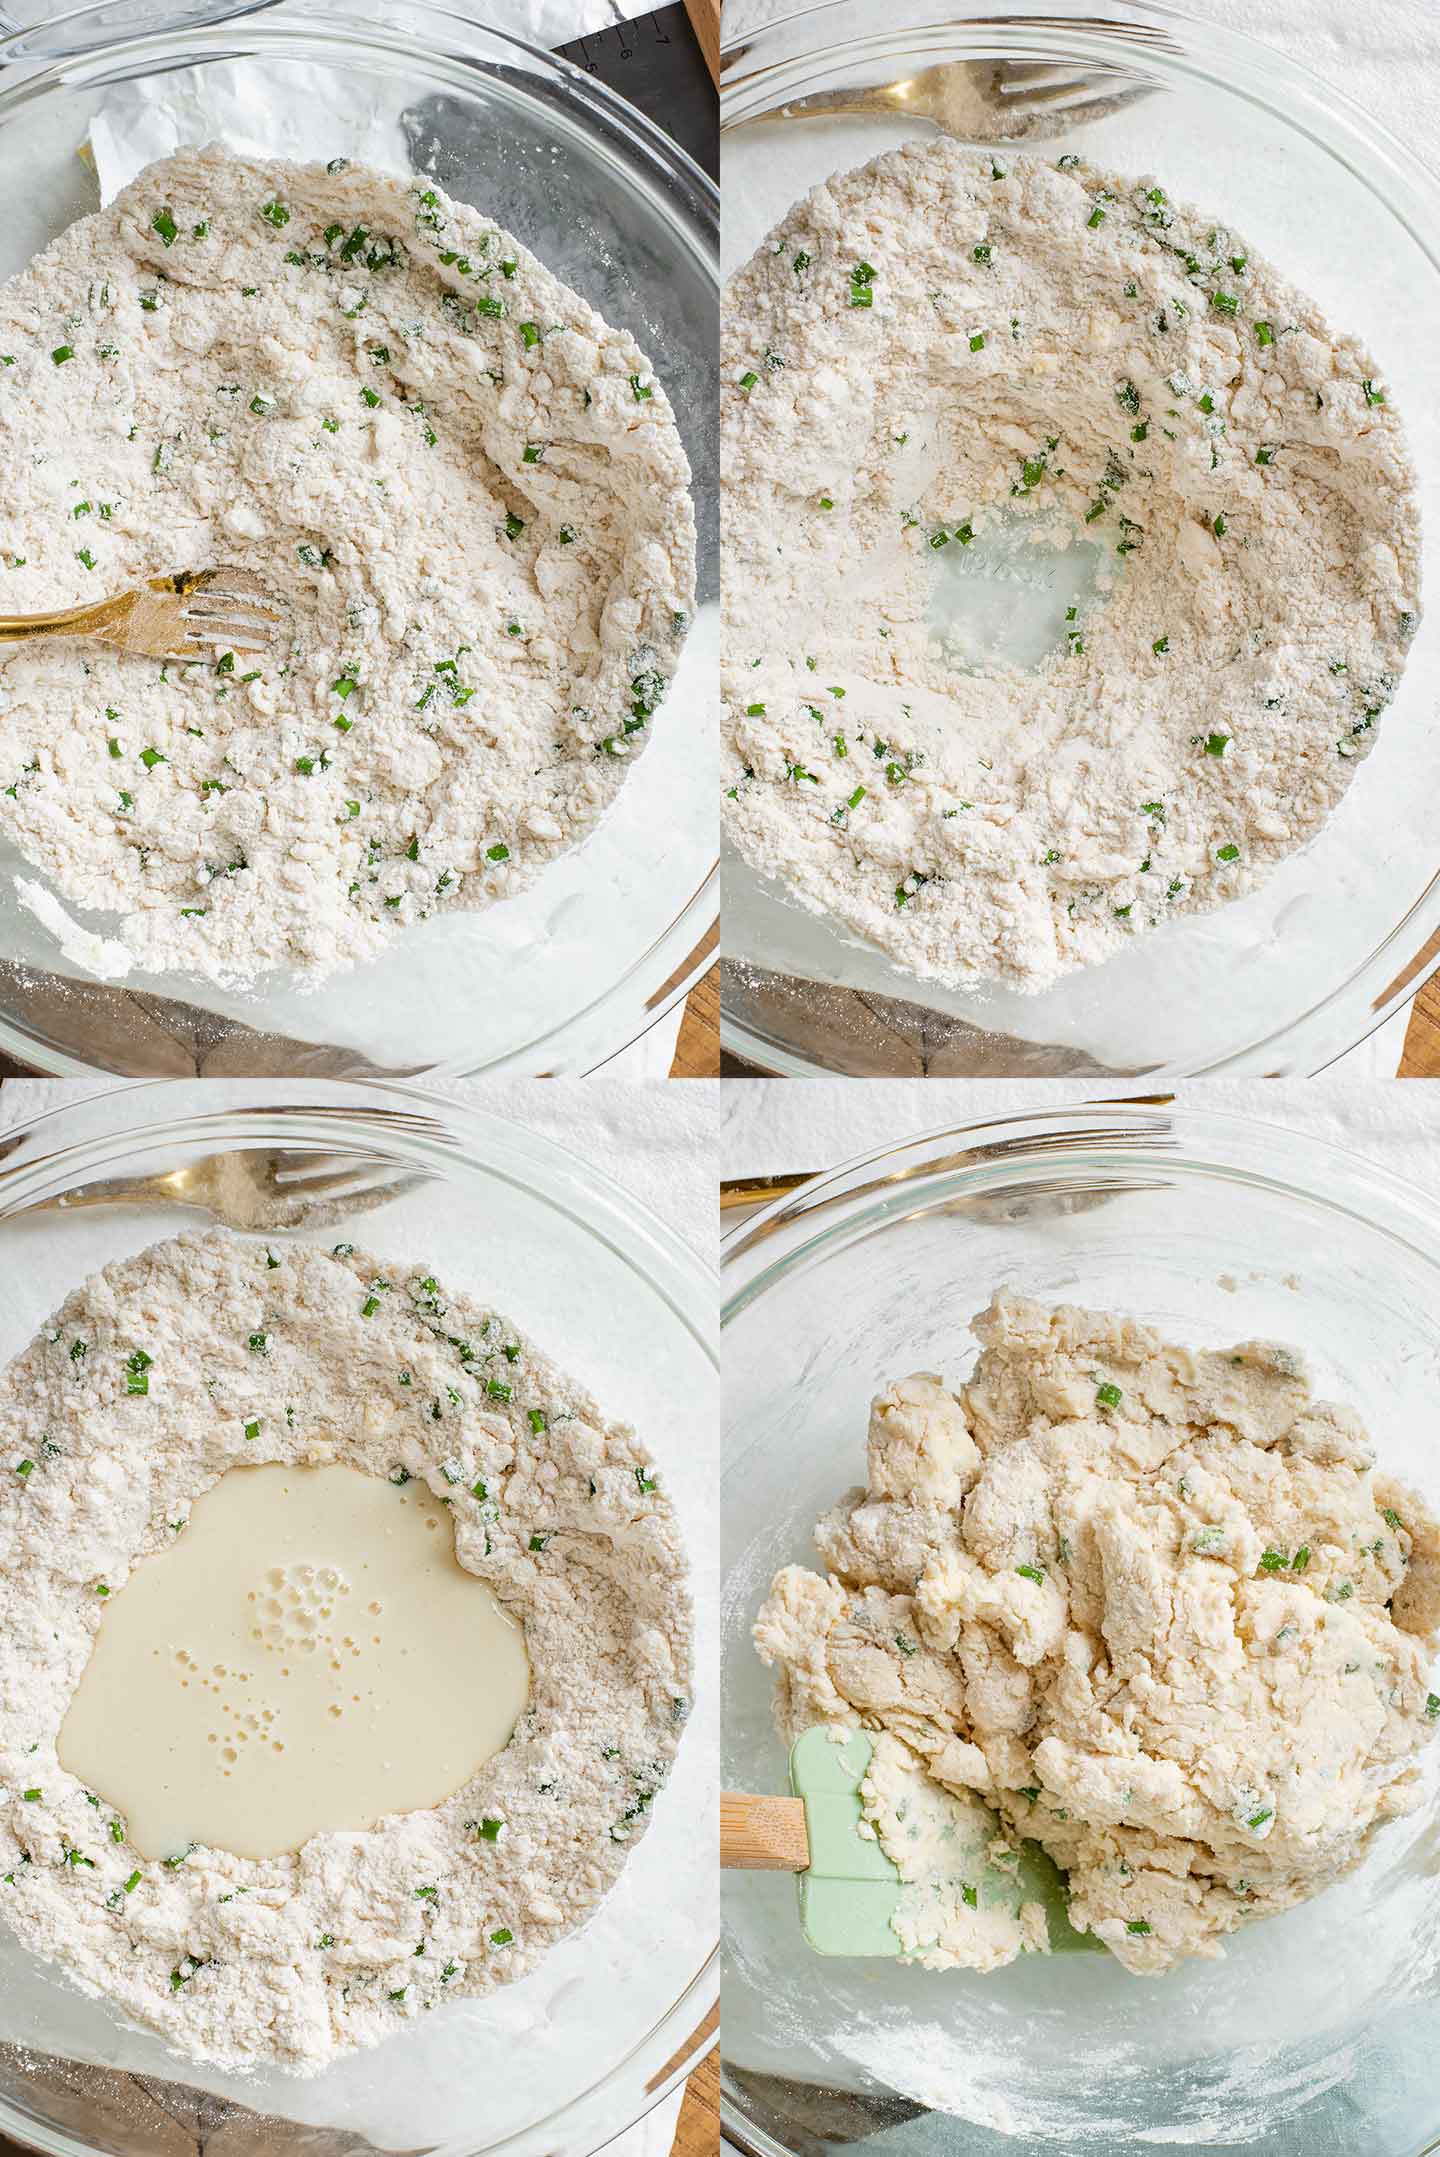 Grid of four process photos. Chives are stirred into a flour mixture. A well is made in the flour. Buttermilk is poured in and finally the crumbly dough has come together.